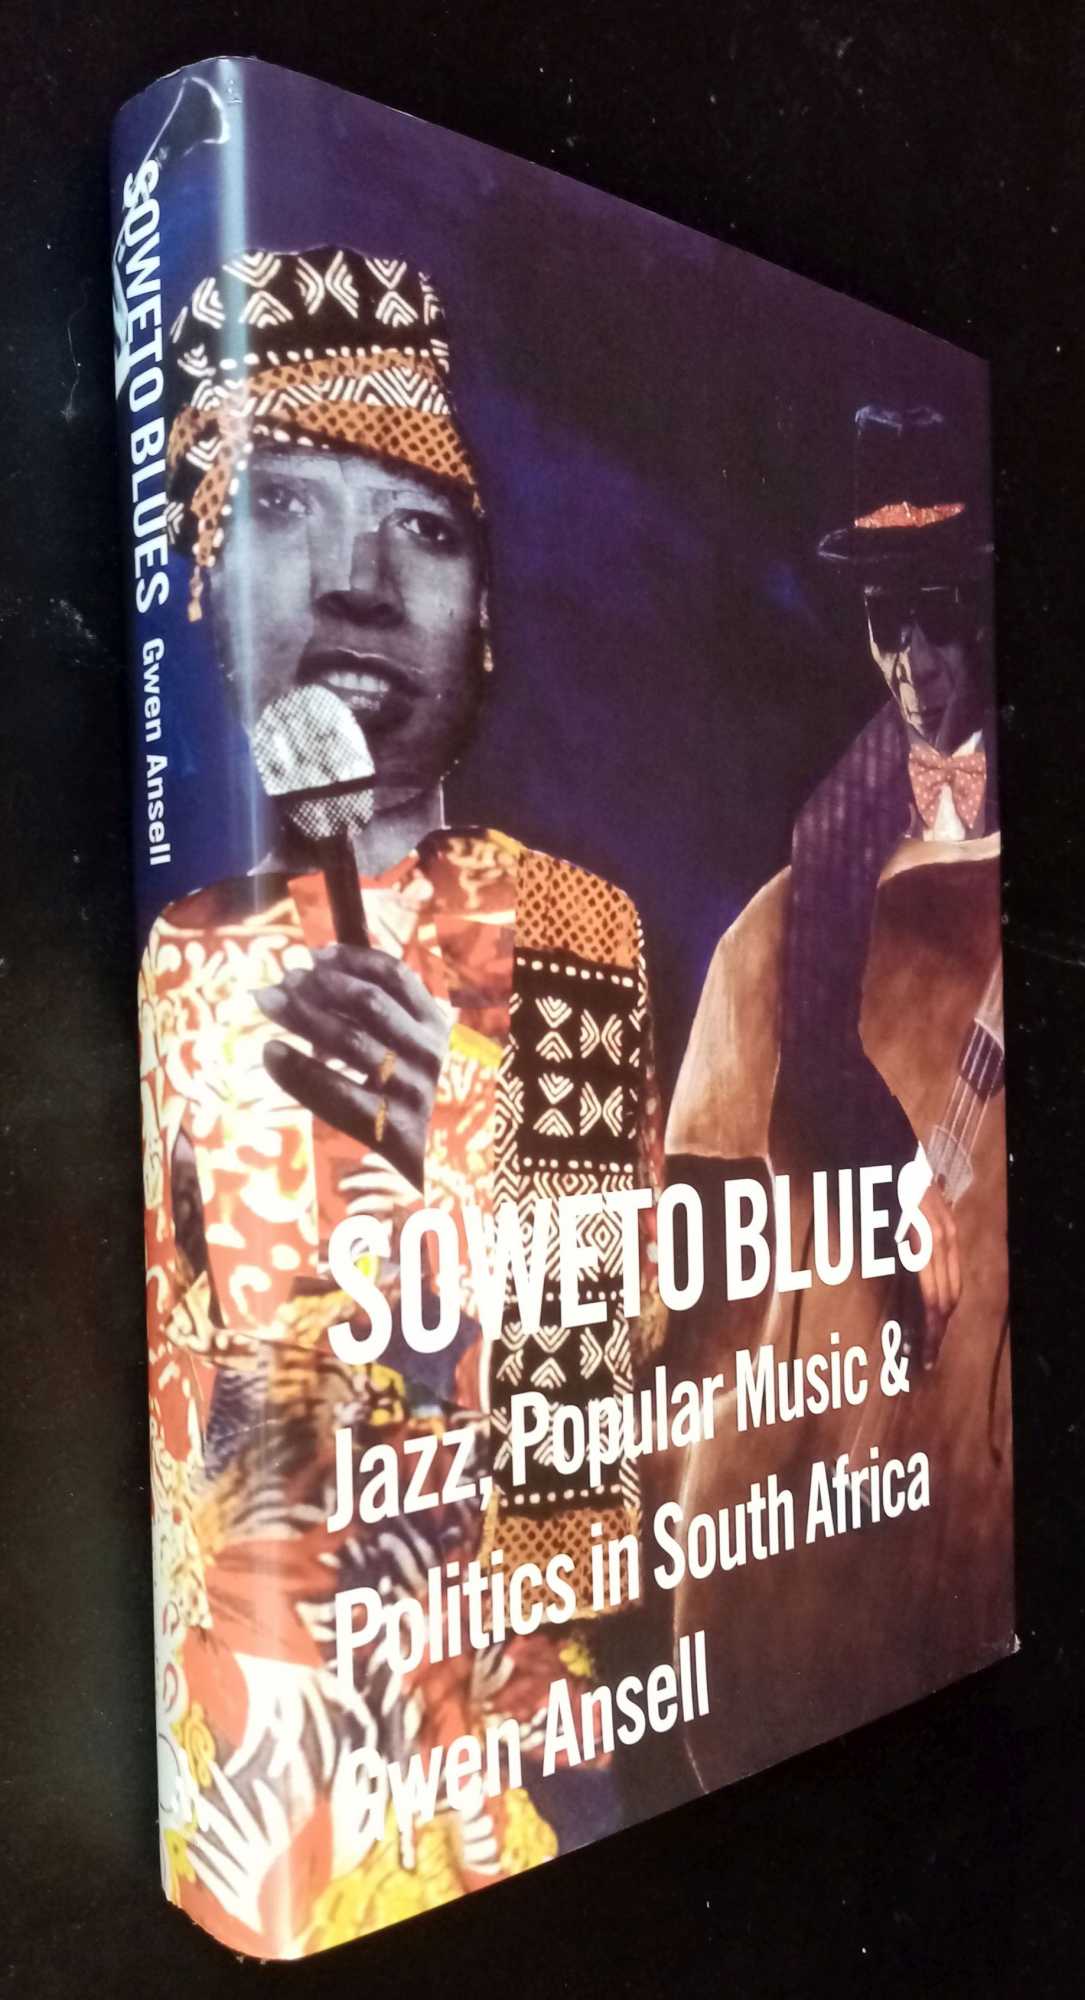 Gwen Ansell - Soweto Blues: Jazz, Popular Music, and Politics in South Africa